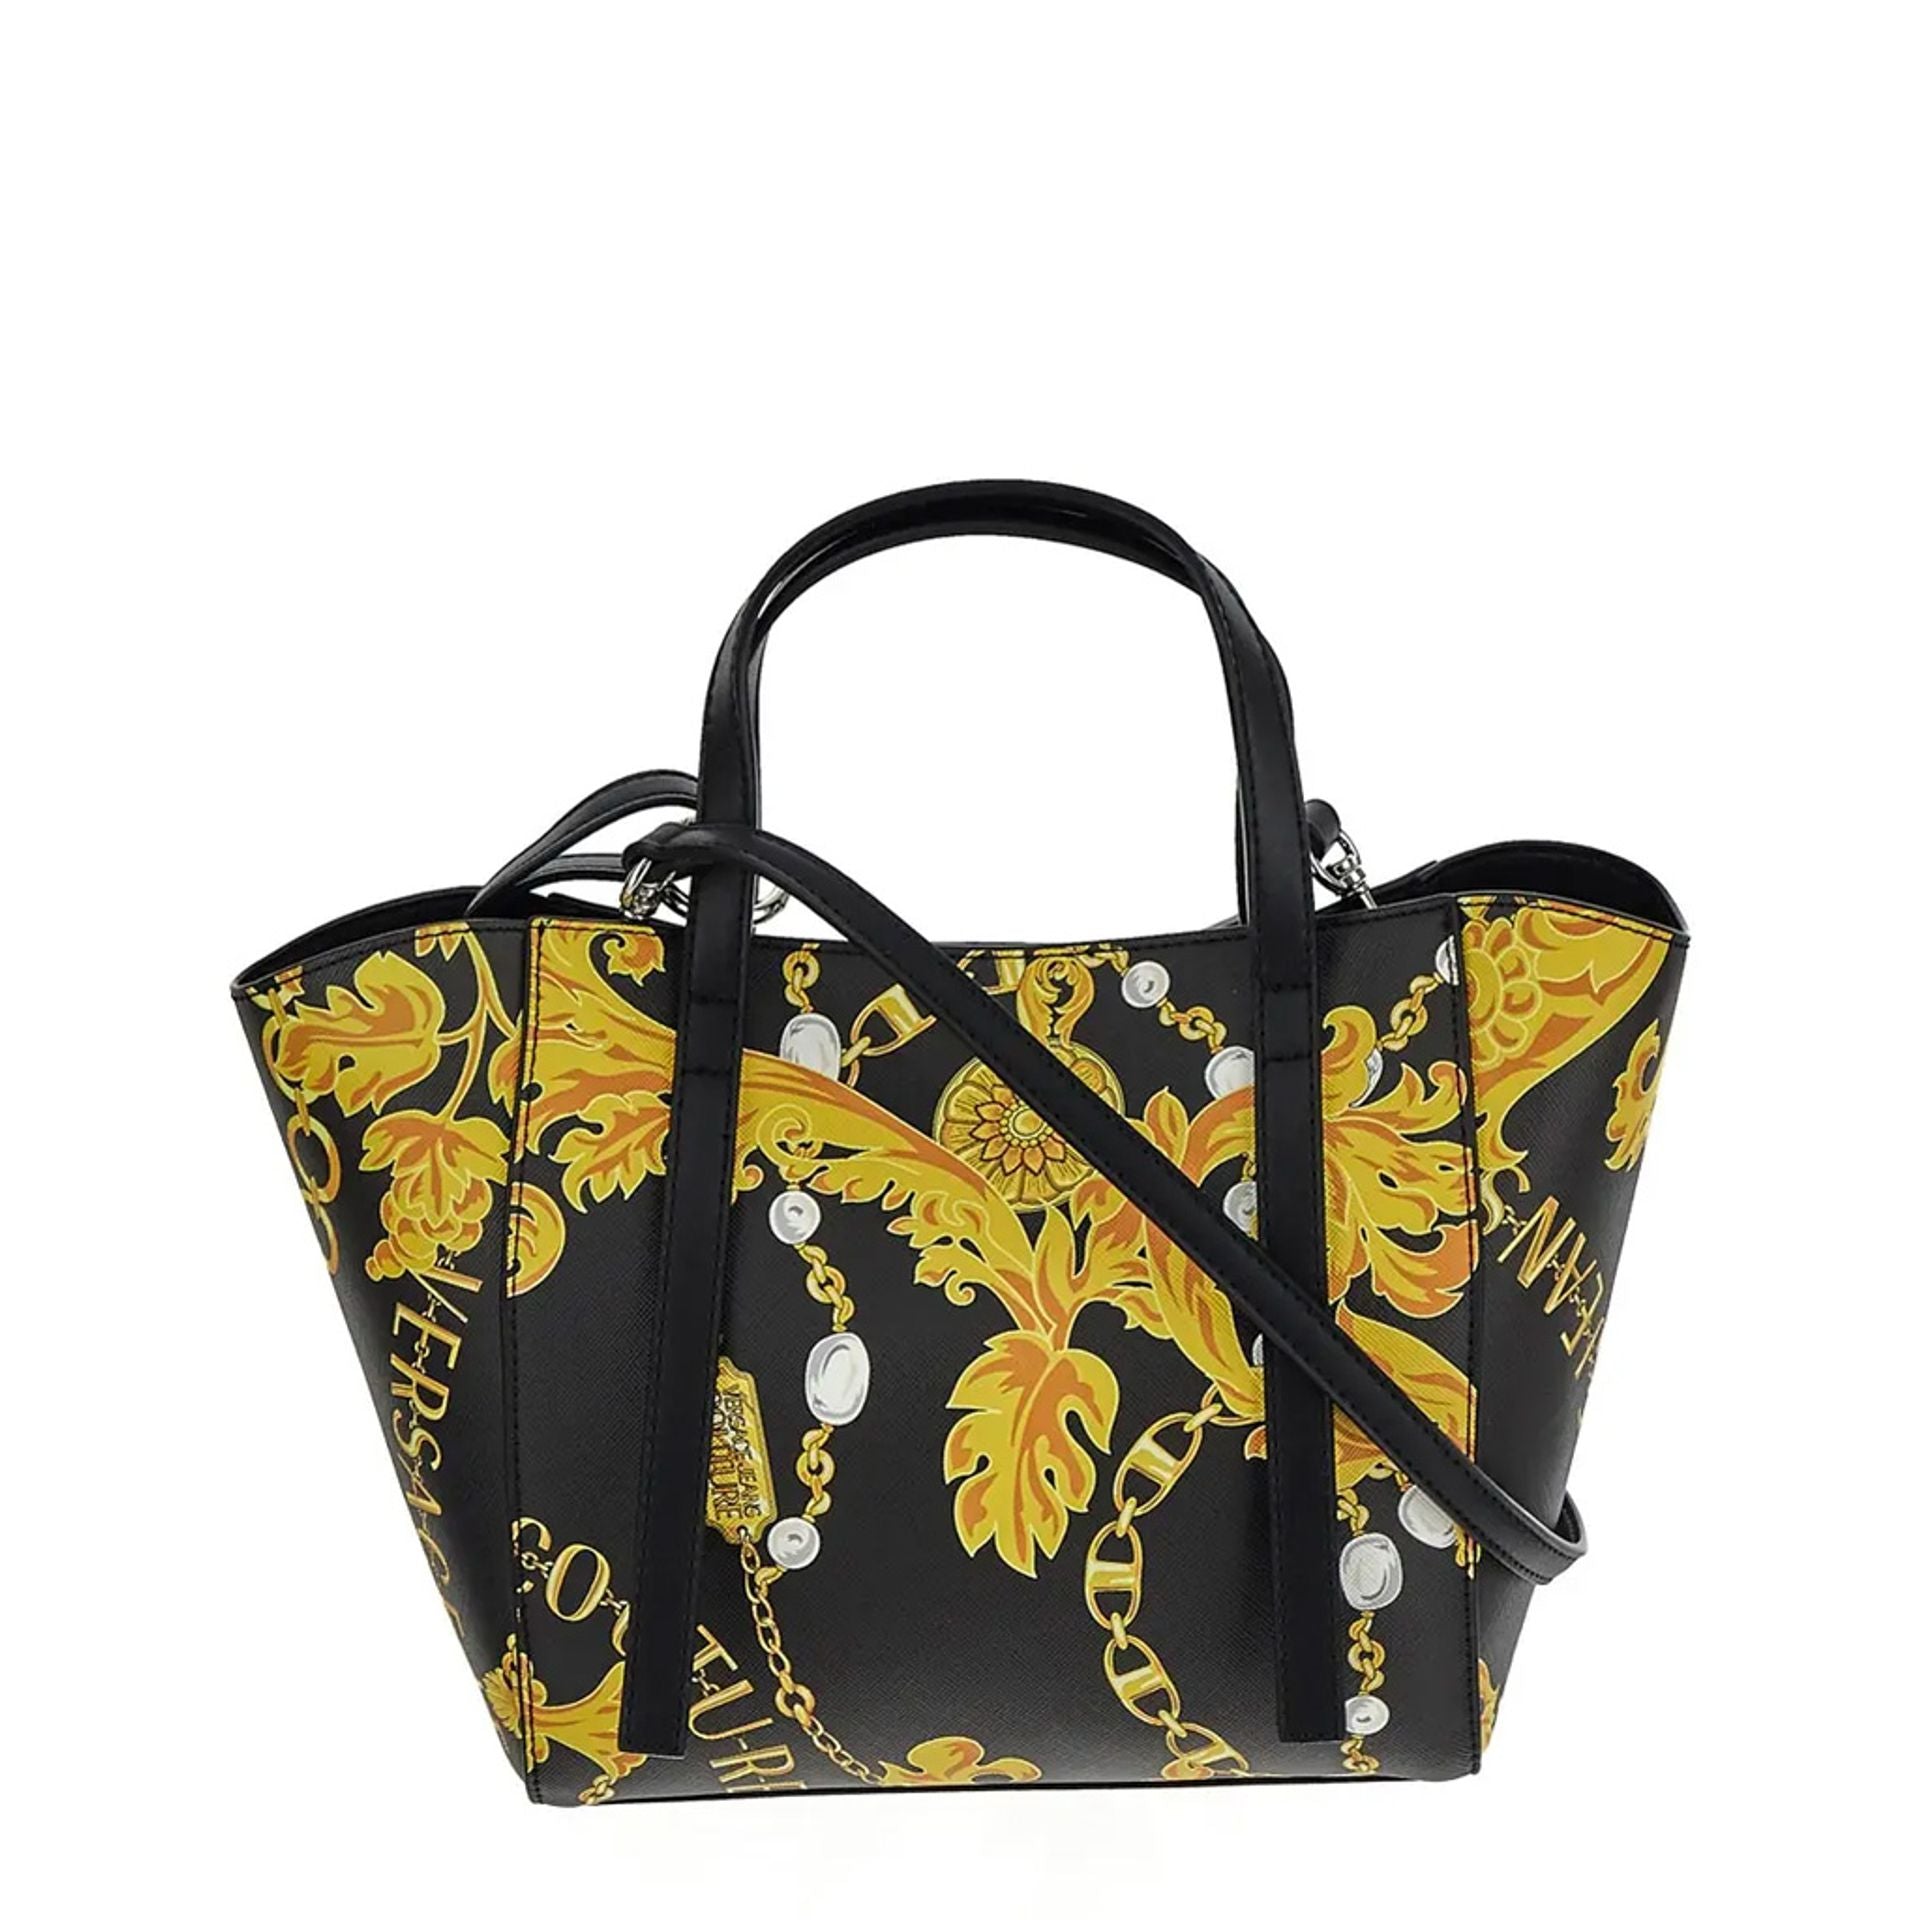 Versace Jeans Shopping bag